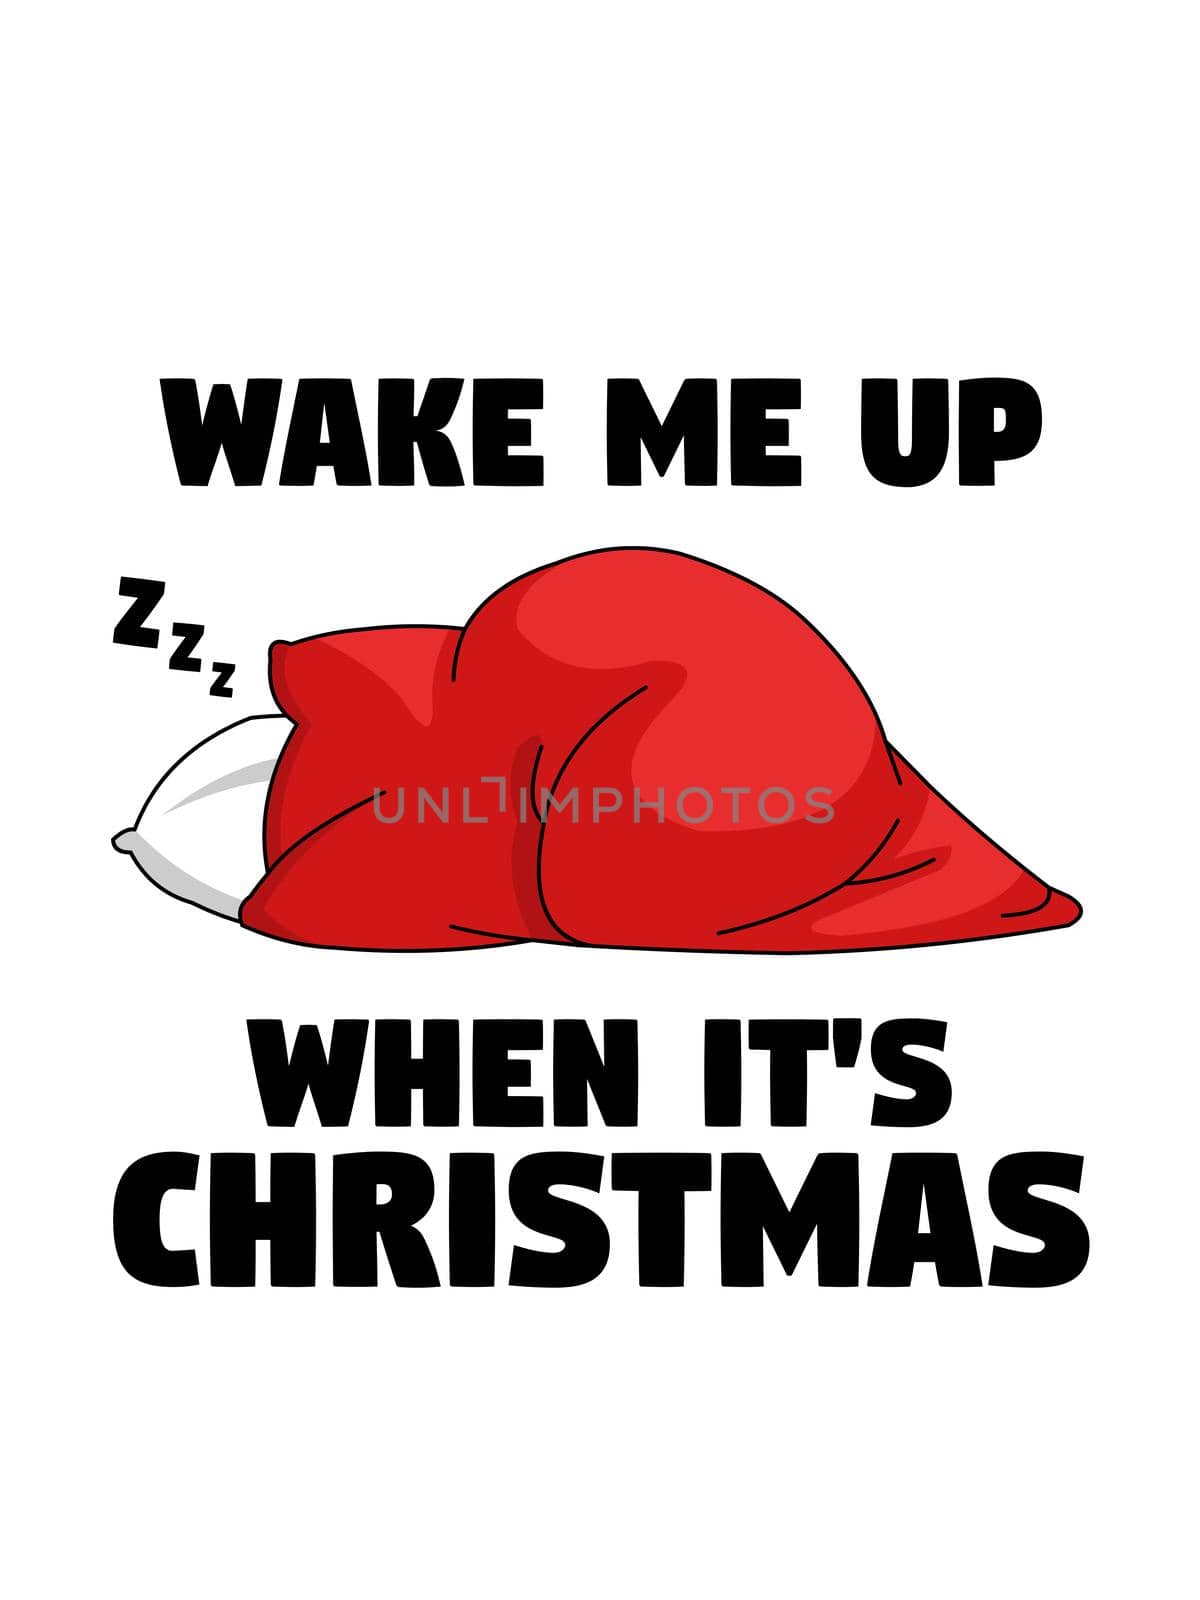 Wake me up when it's Christmas by Bigalbaloo